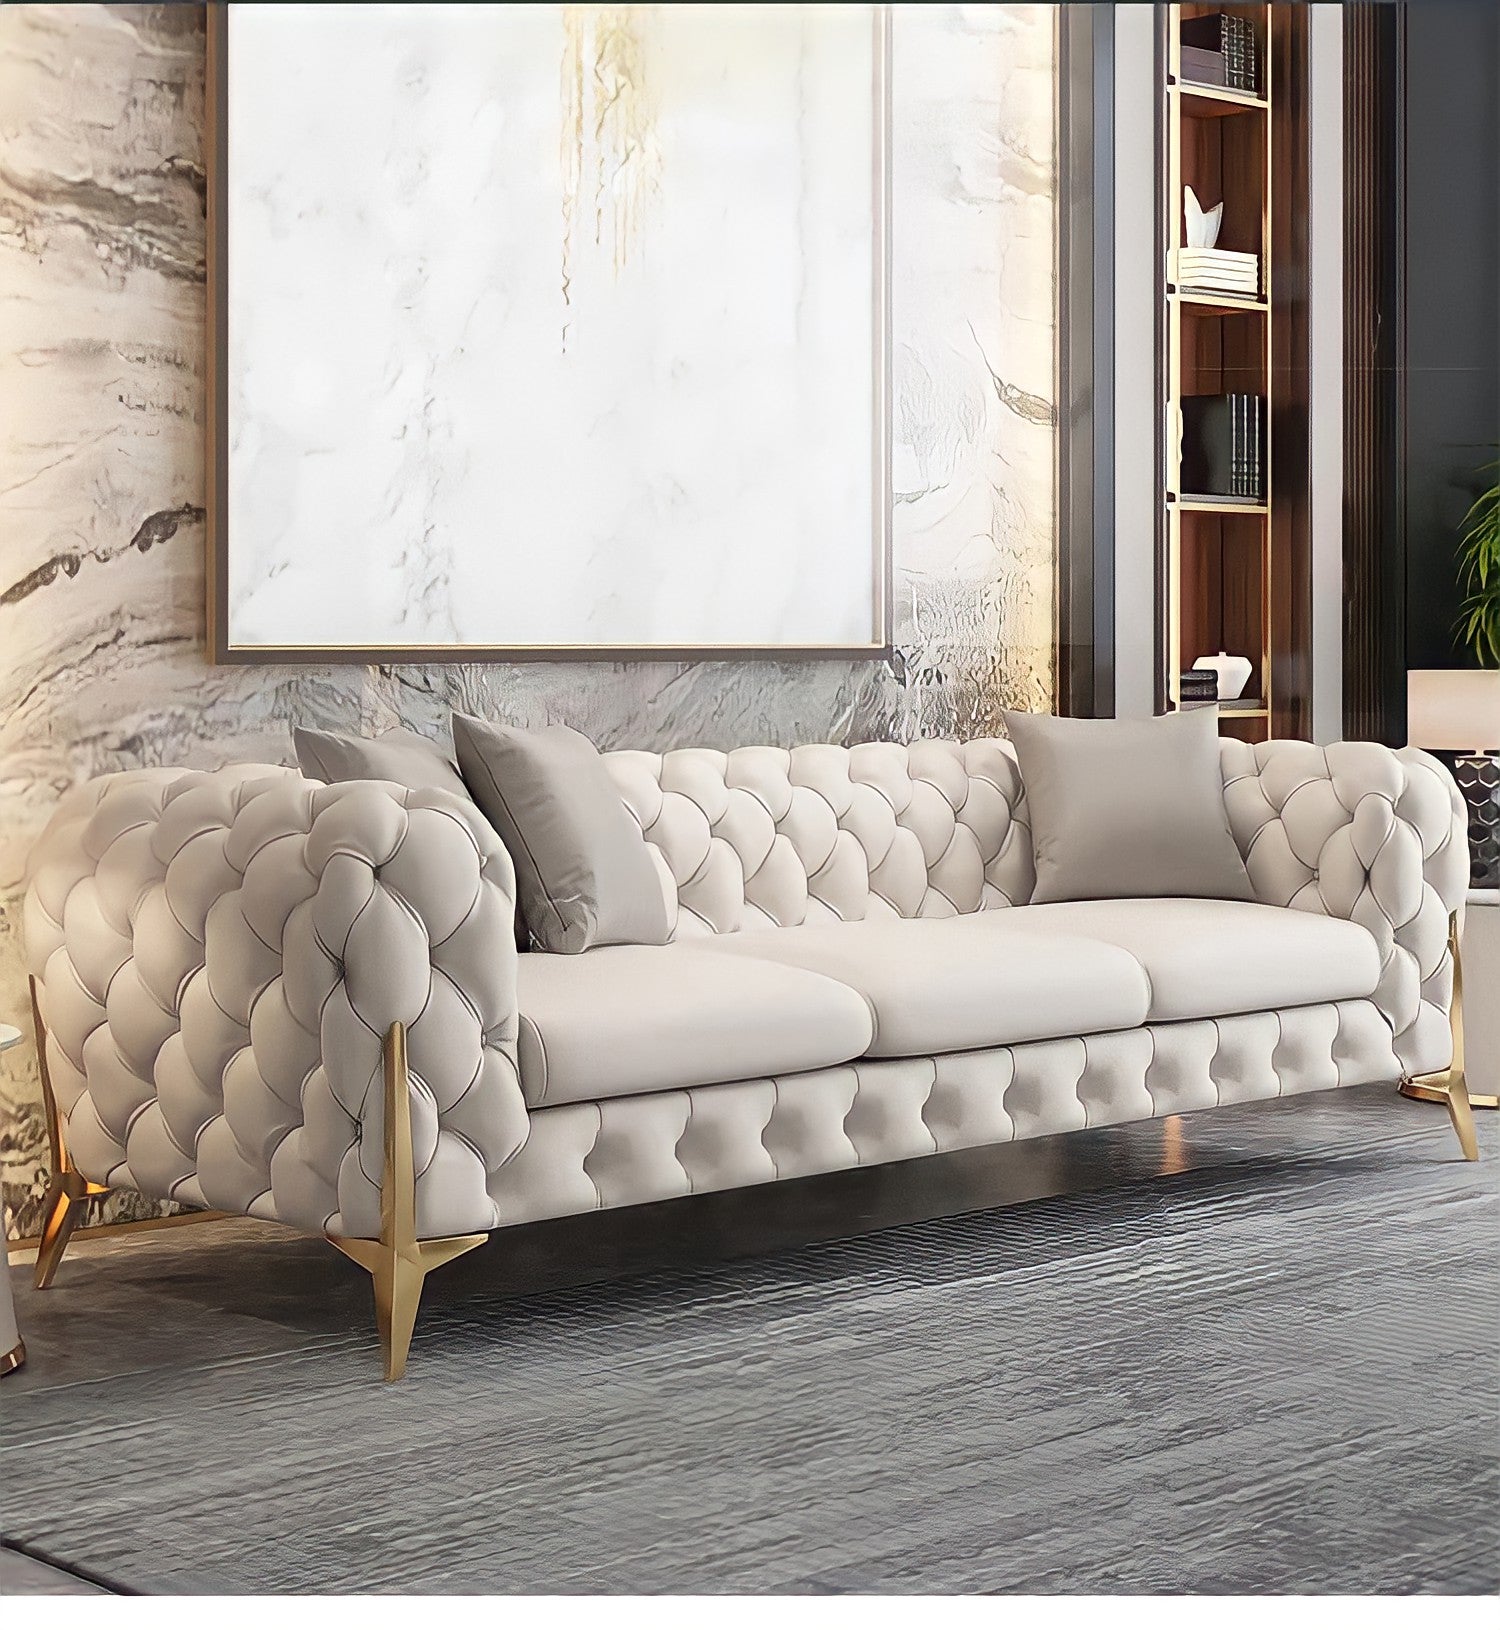 The Rocky Chesterfield Sofas Sets in Luxury Light Cream Leather – LISF LTD.